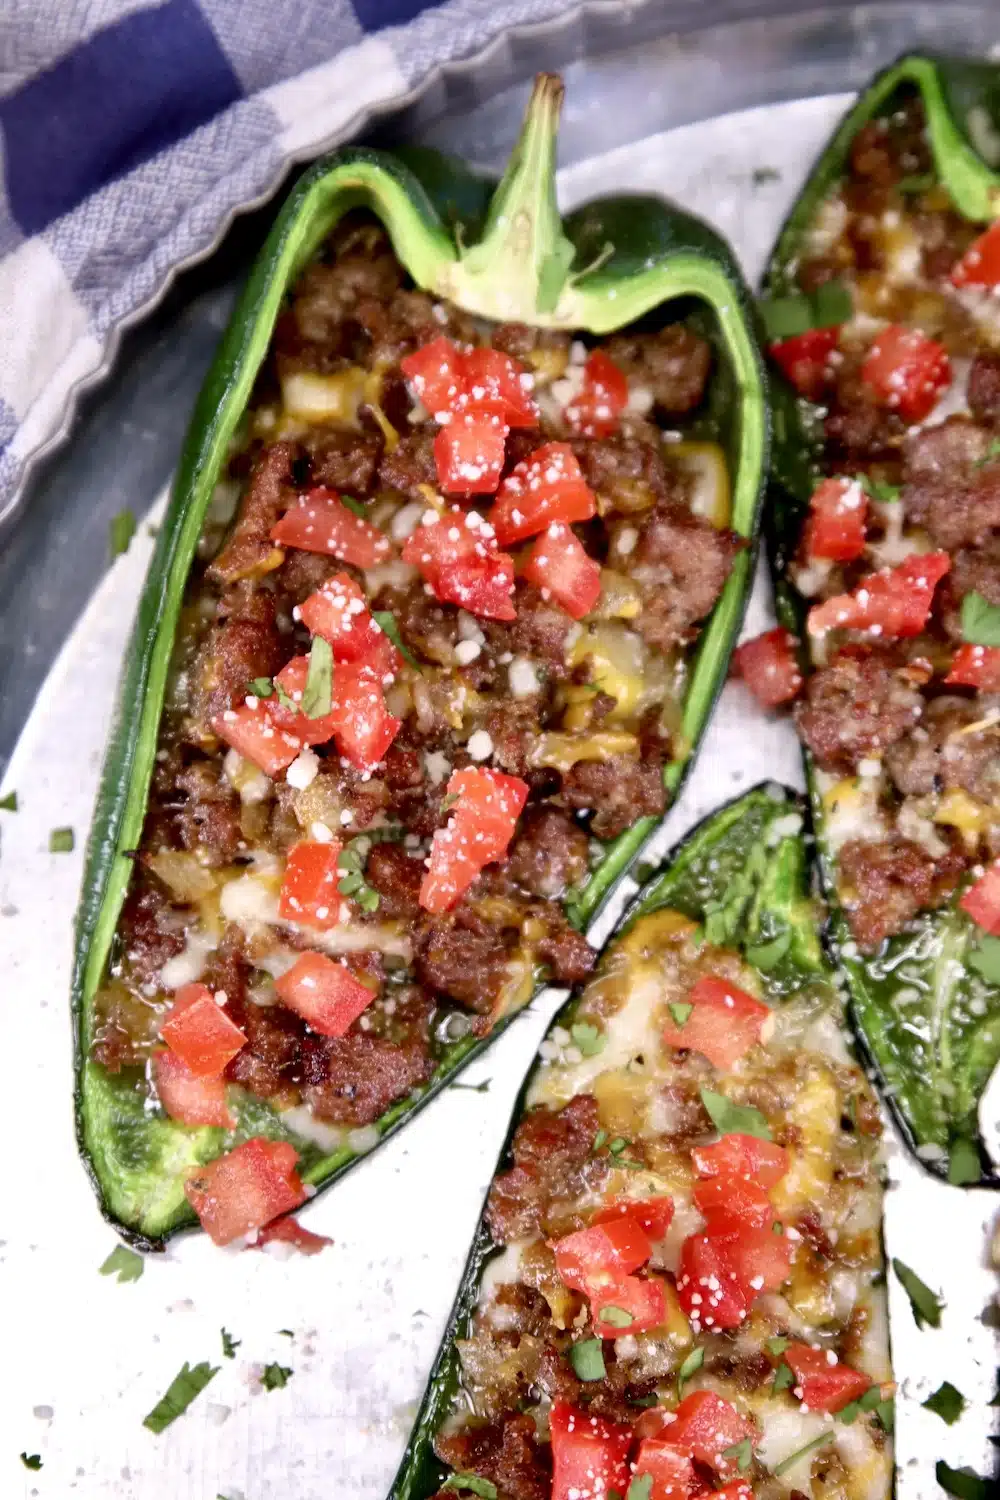 Poblano peppers with sausage, cheese and tomatoes.